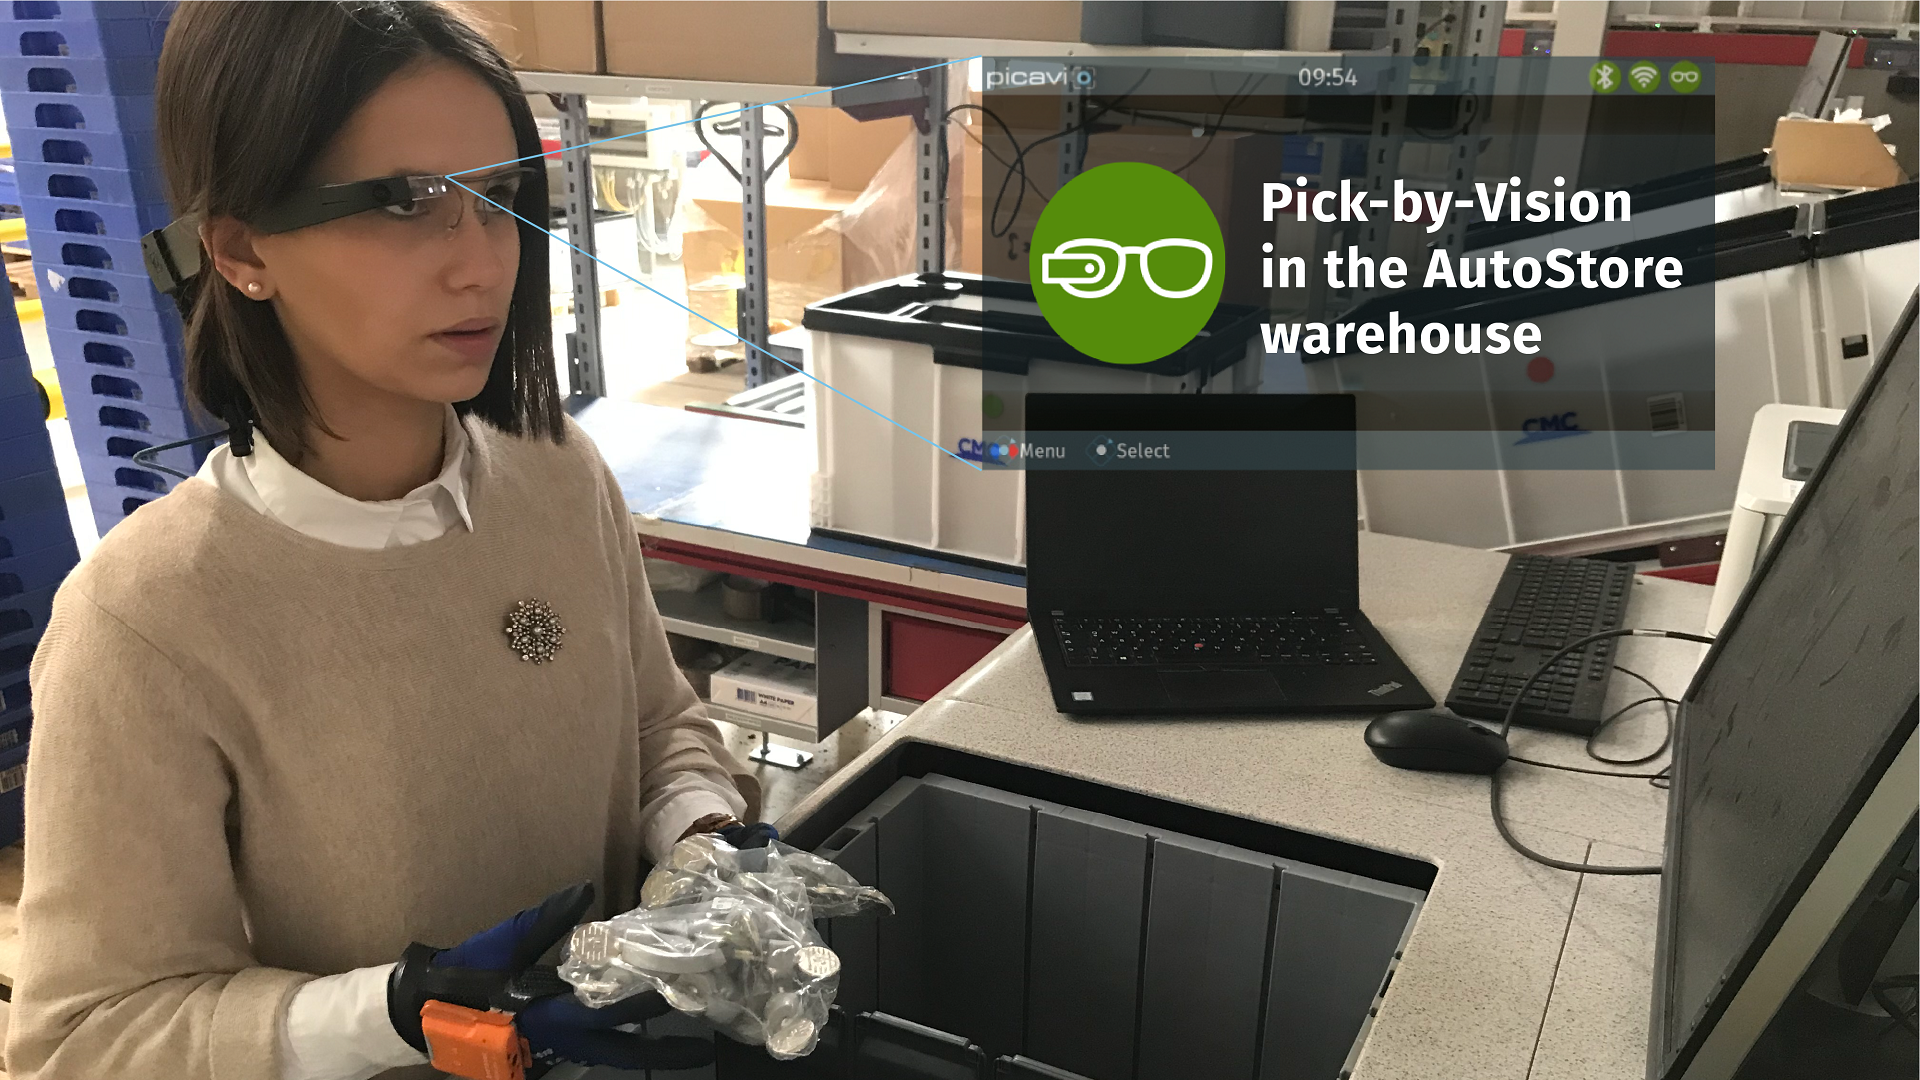 Pick-by-Vision in the AutoStore warehouse